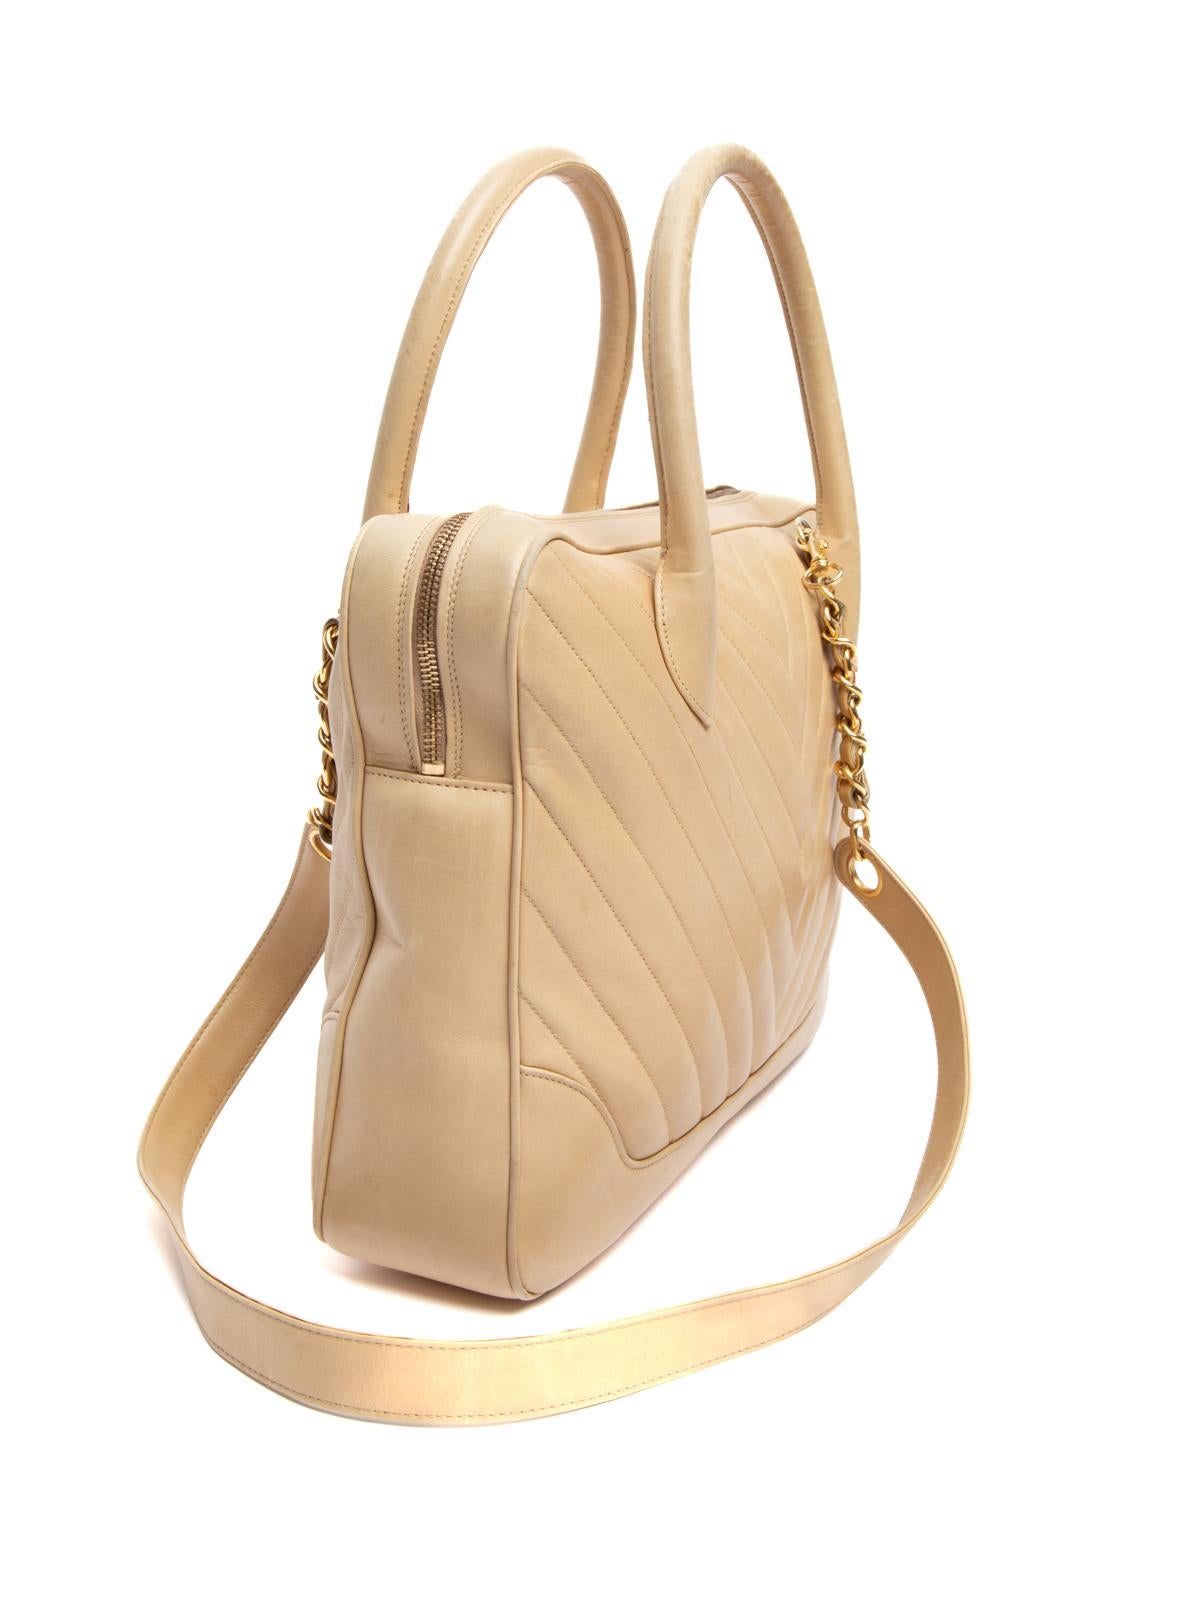 Editor's Note

Tote around this chic used Chanel top handle bag to make the ultimate style statement. Easy to carry by hand or wear on the crook of your arm, this vintage beige chevron pre-loved Chanel top handle bag is set to make a welcomed